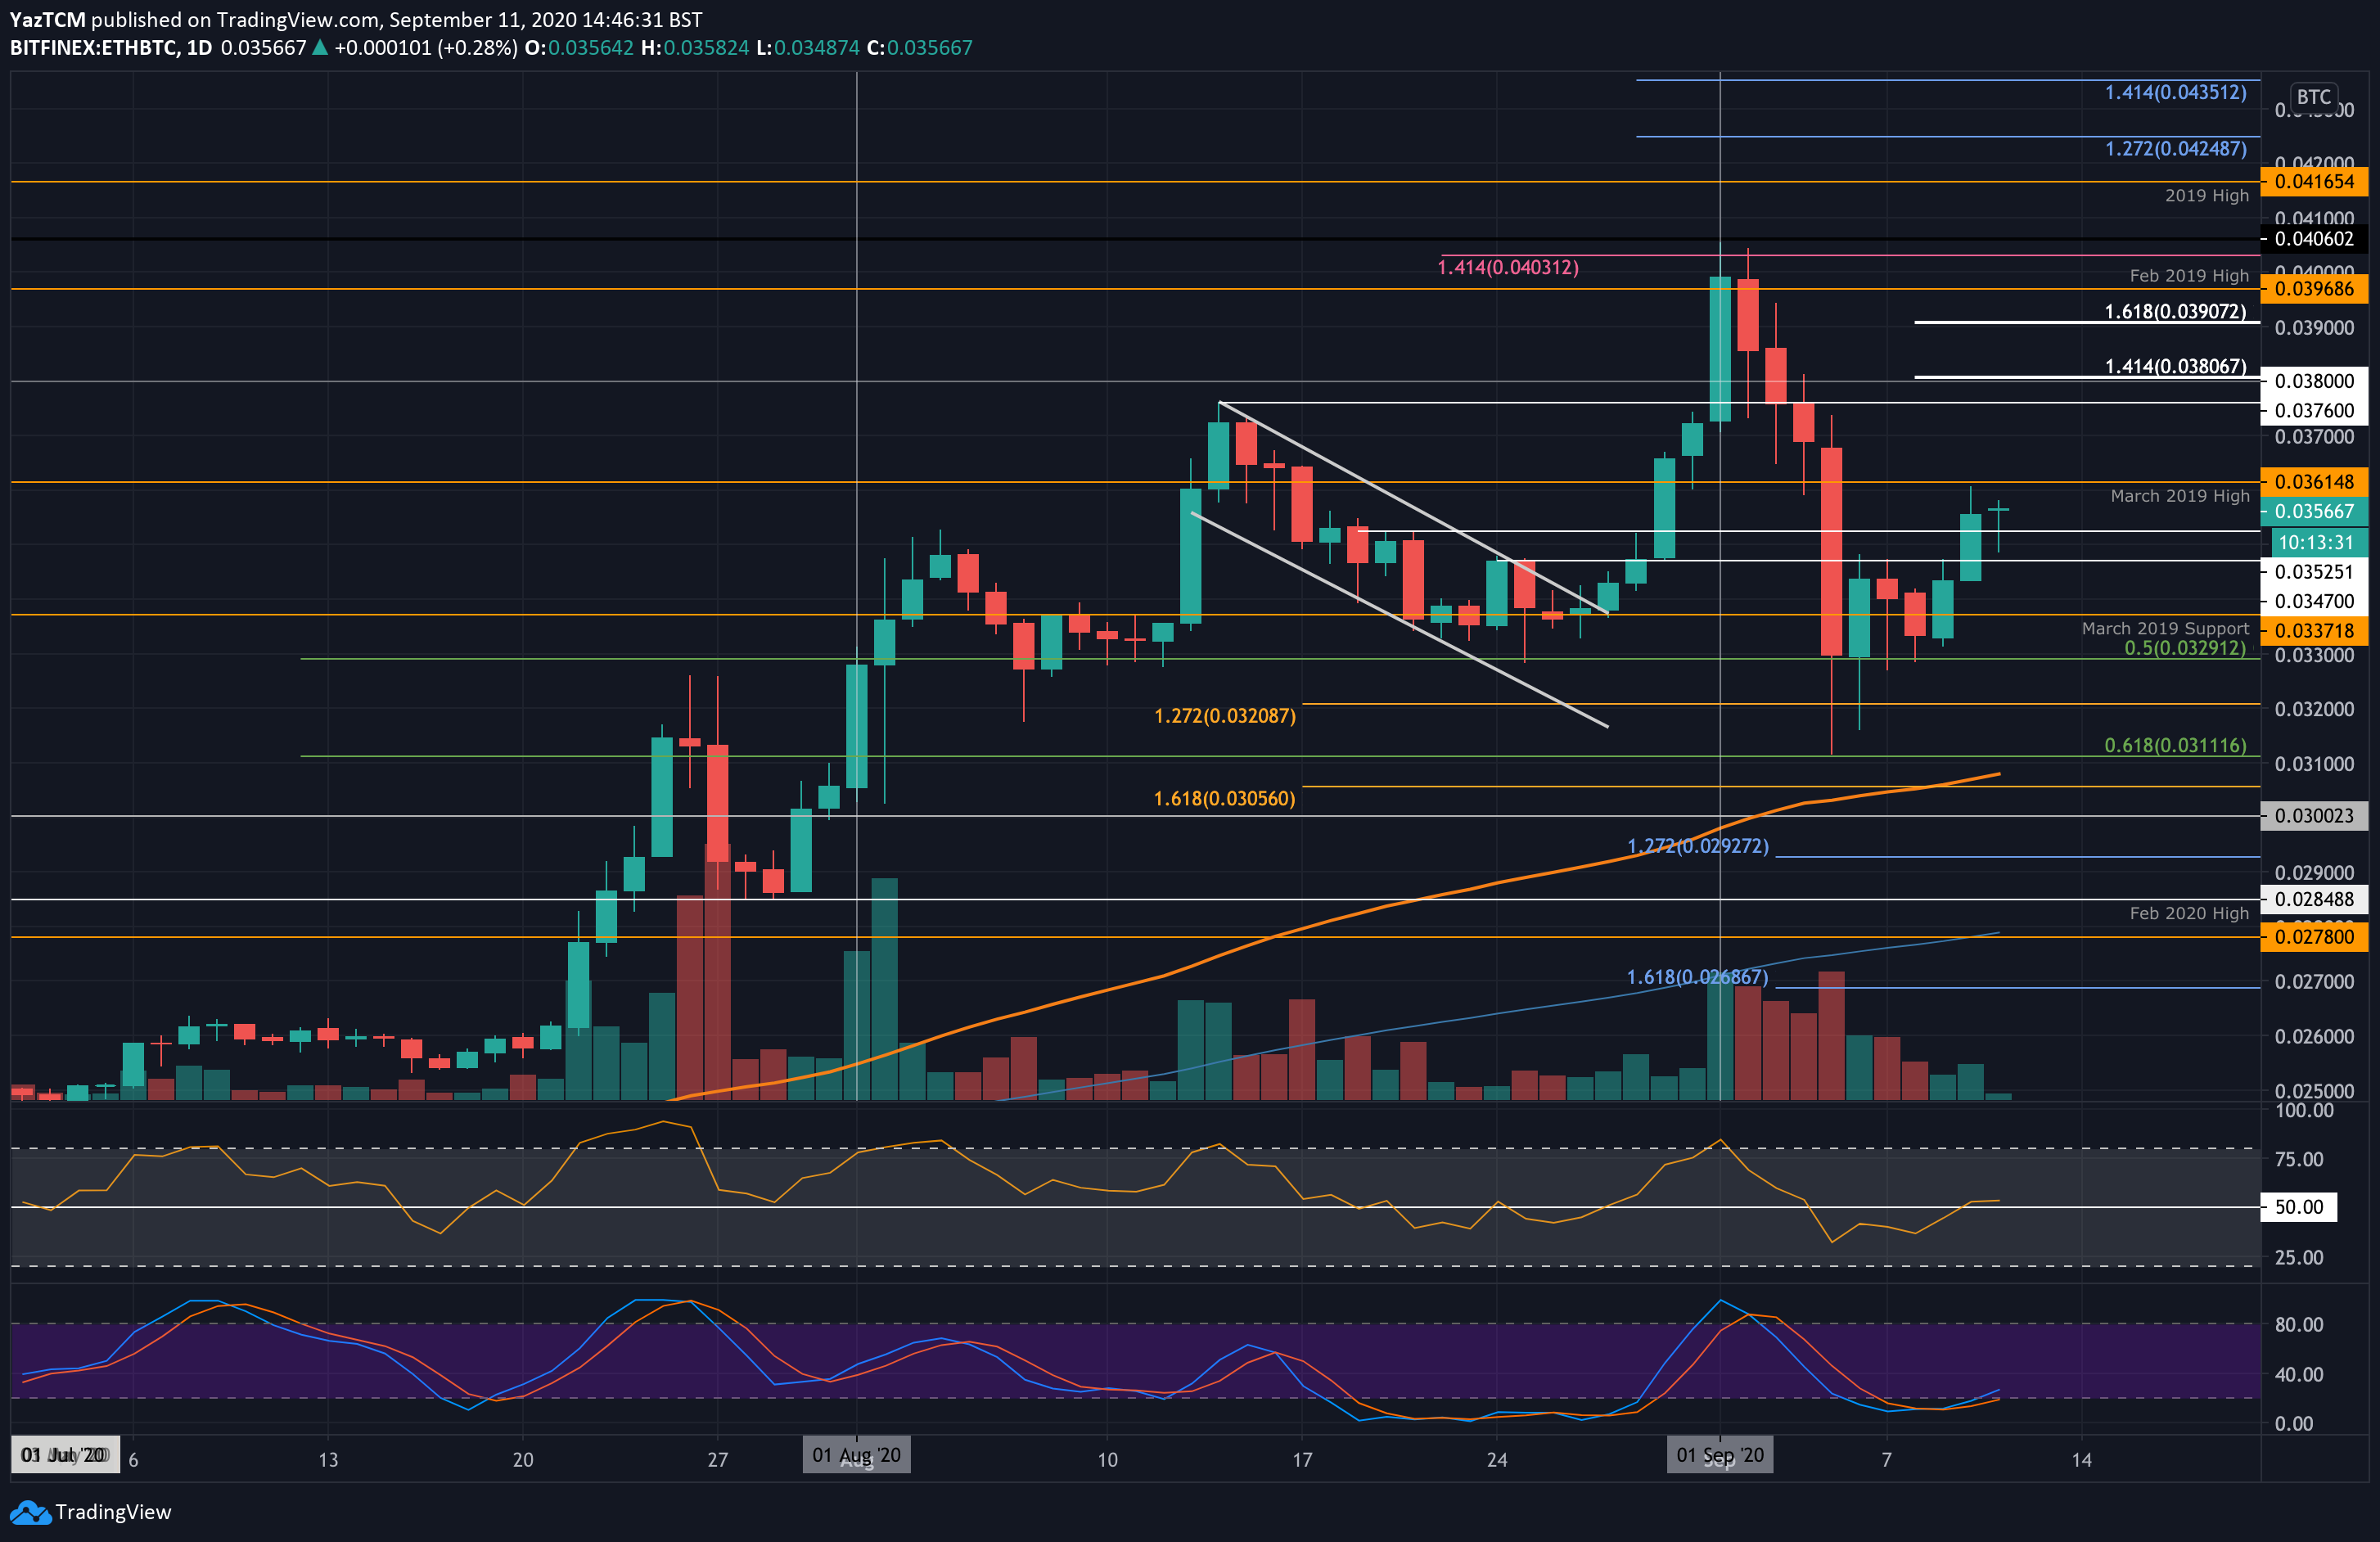 Crypto Price Analysis & Overview September 11th: Bitcoin, Ethereum, Ripple, Cardano, and Chainlink